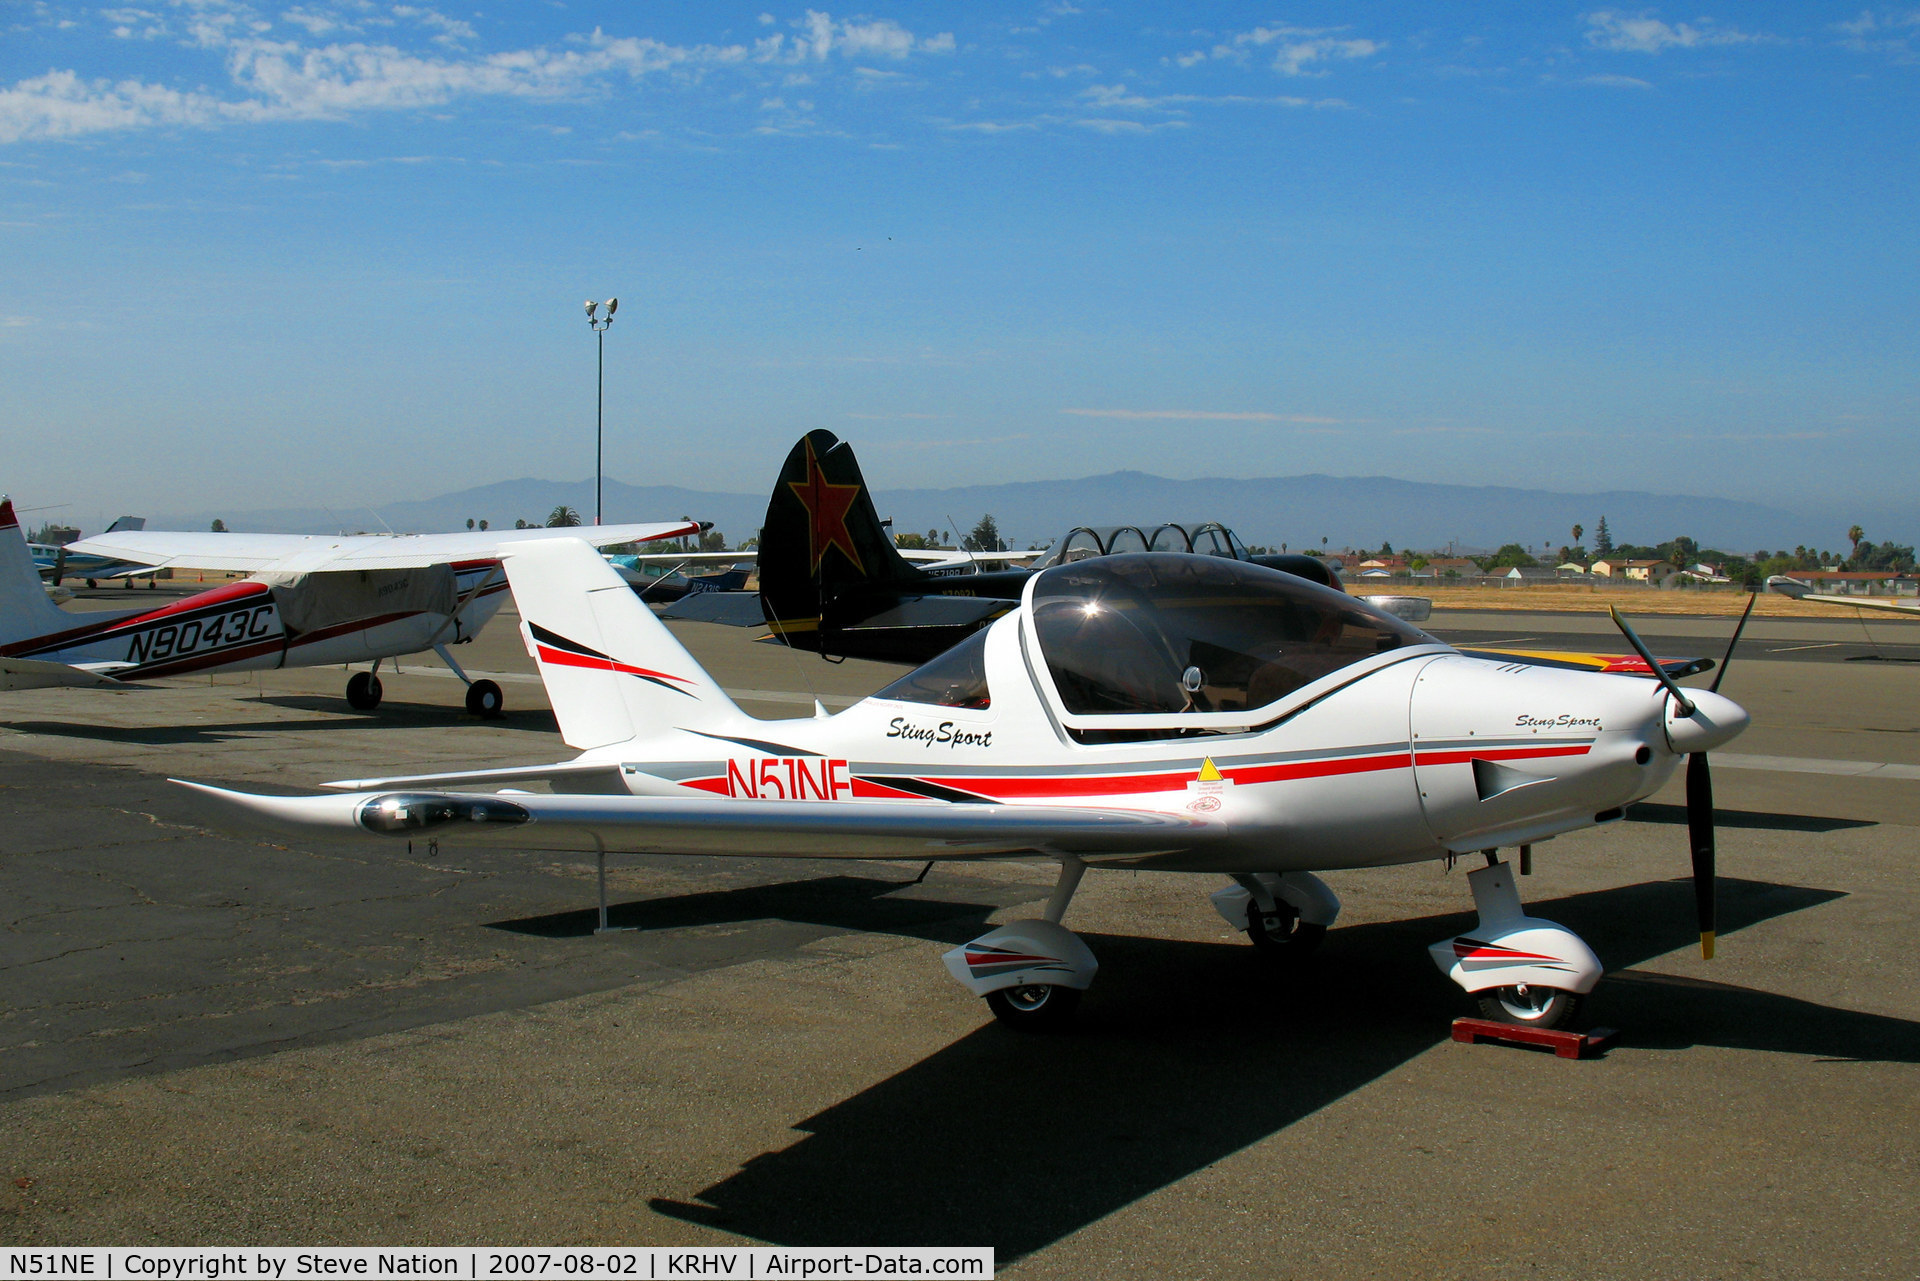 N51NE, 2007 TL Ultralight TL-2000 Sting Sport C/N TLUSA154, 2007 Tl Ultralight Sro STINGSPORT shortly after delivery to Light Sport Airplanes West, Salinas, CA (now N161MZ)